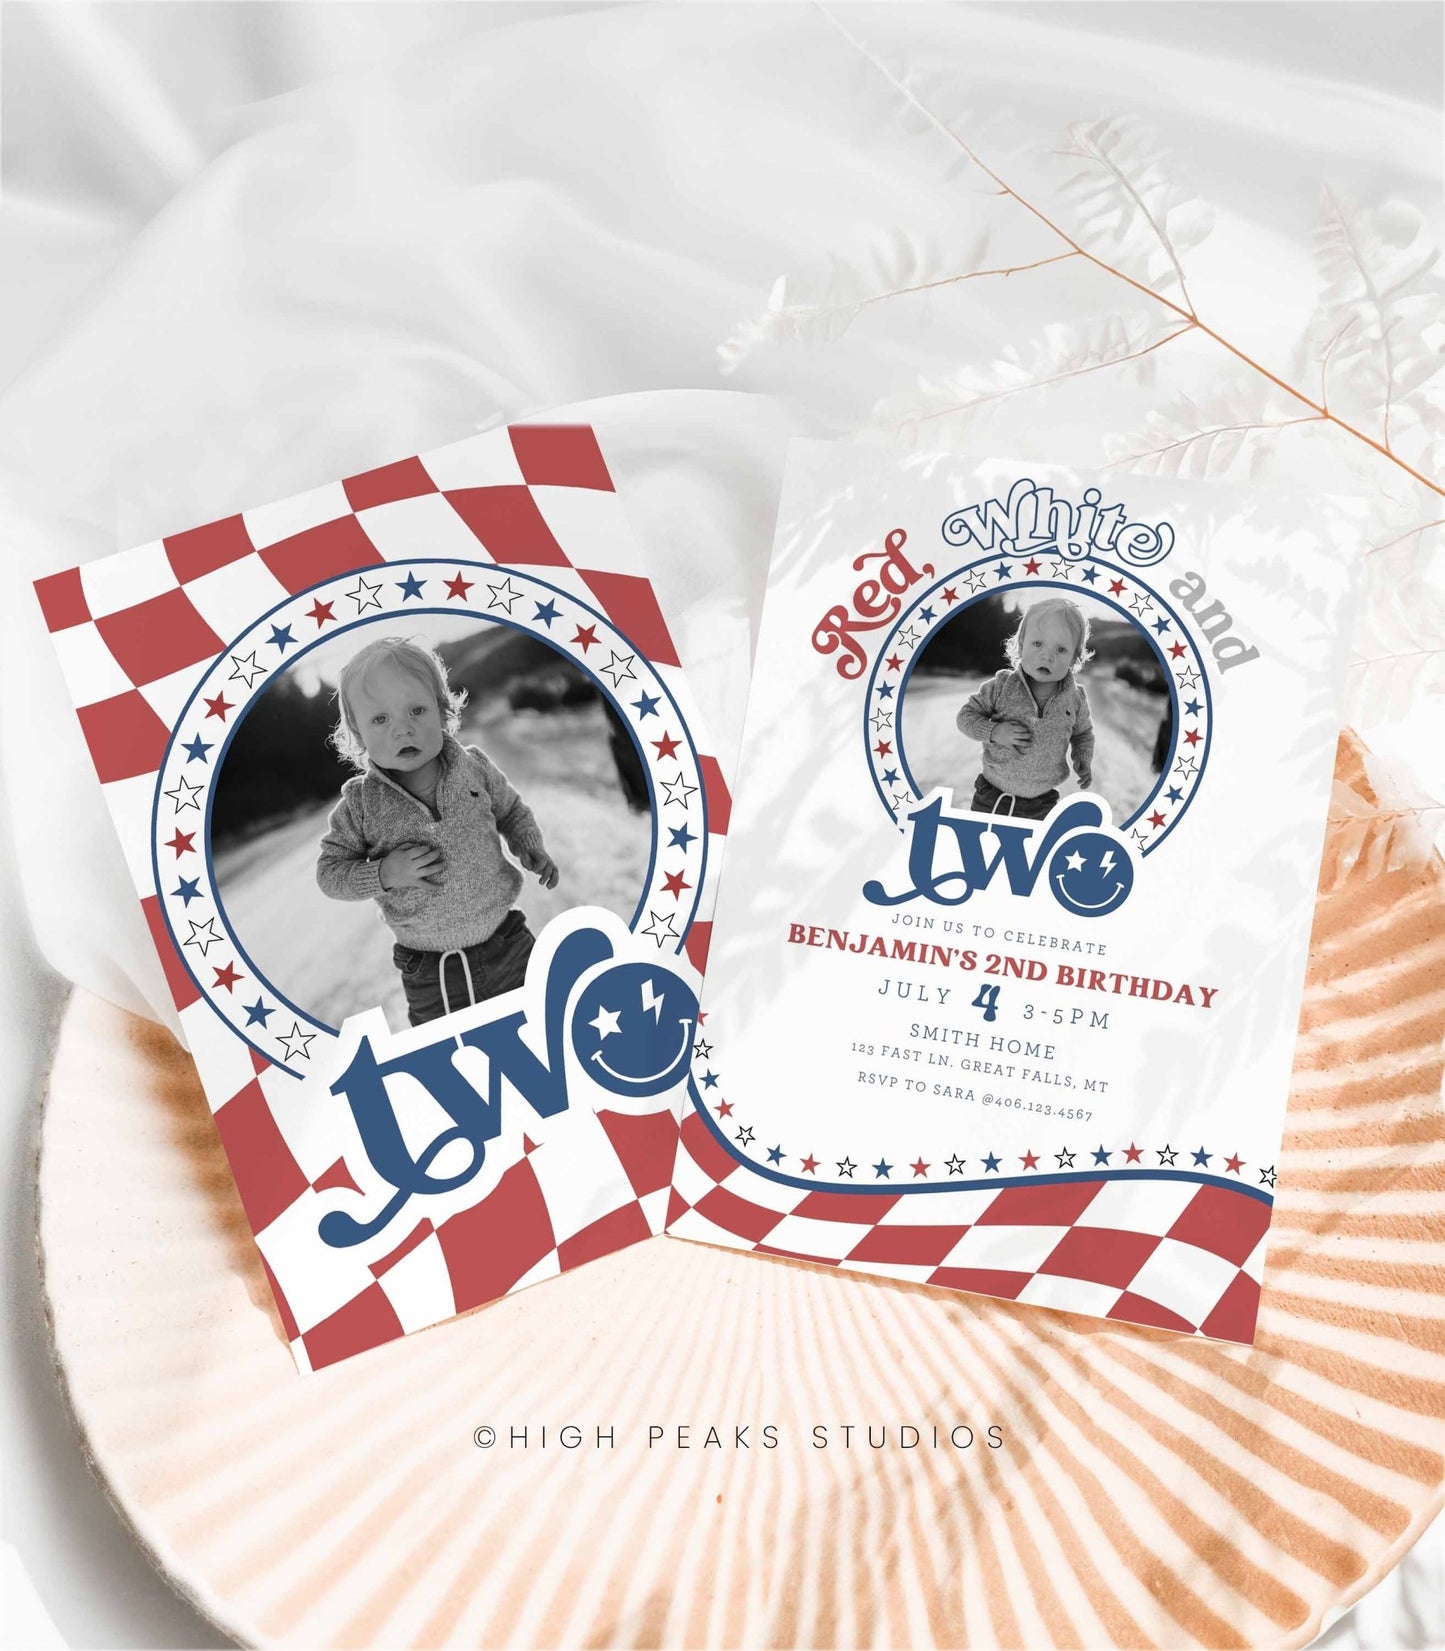 Red, White and TWO Photo Birthday Invitation - High Peaks Studios